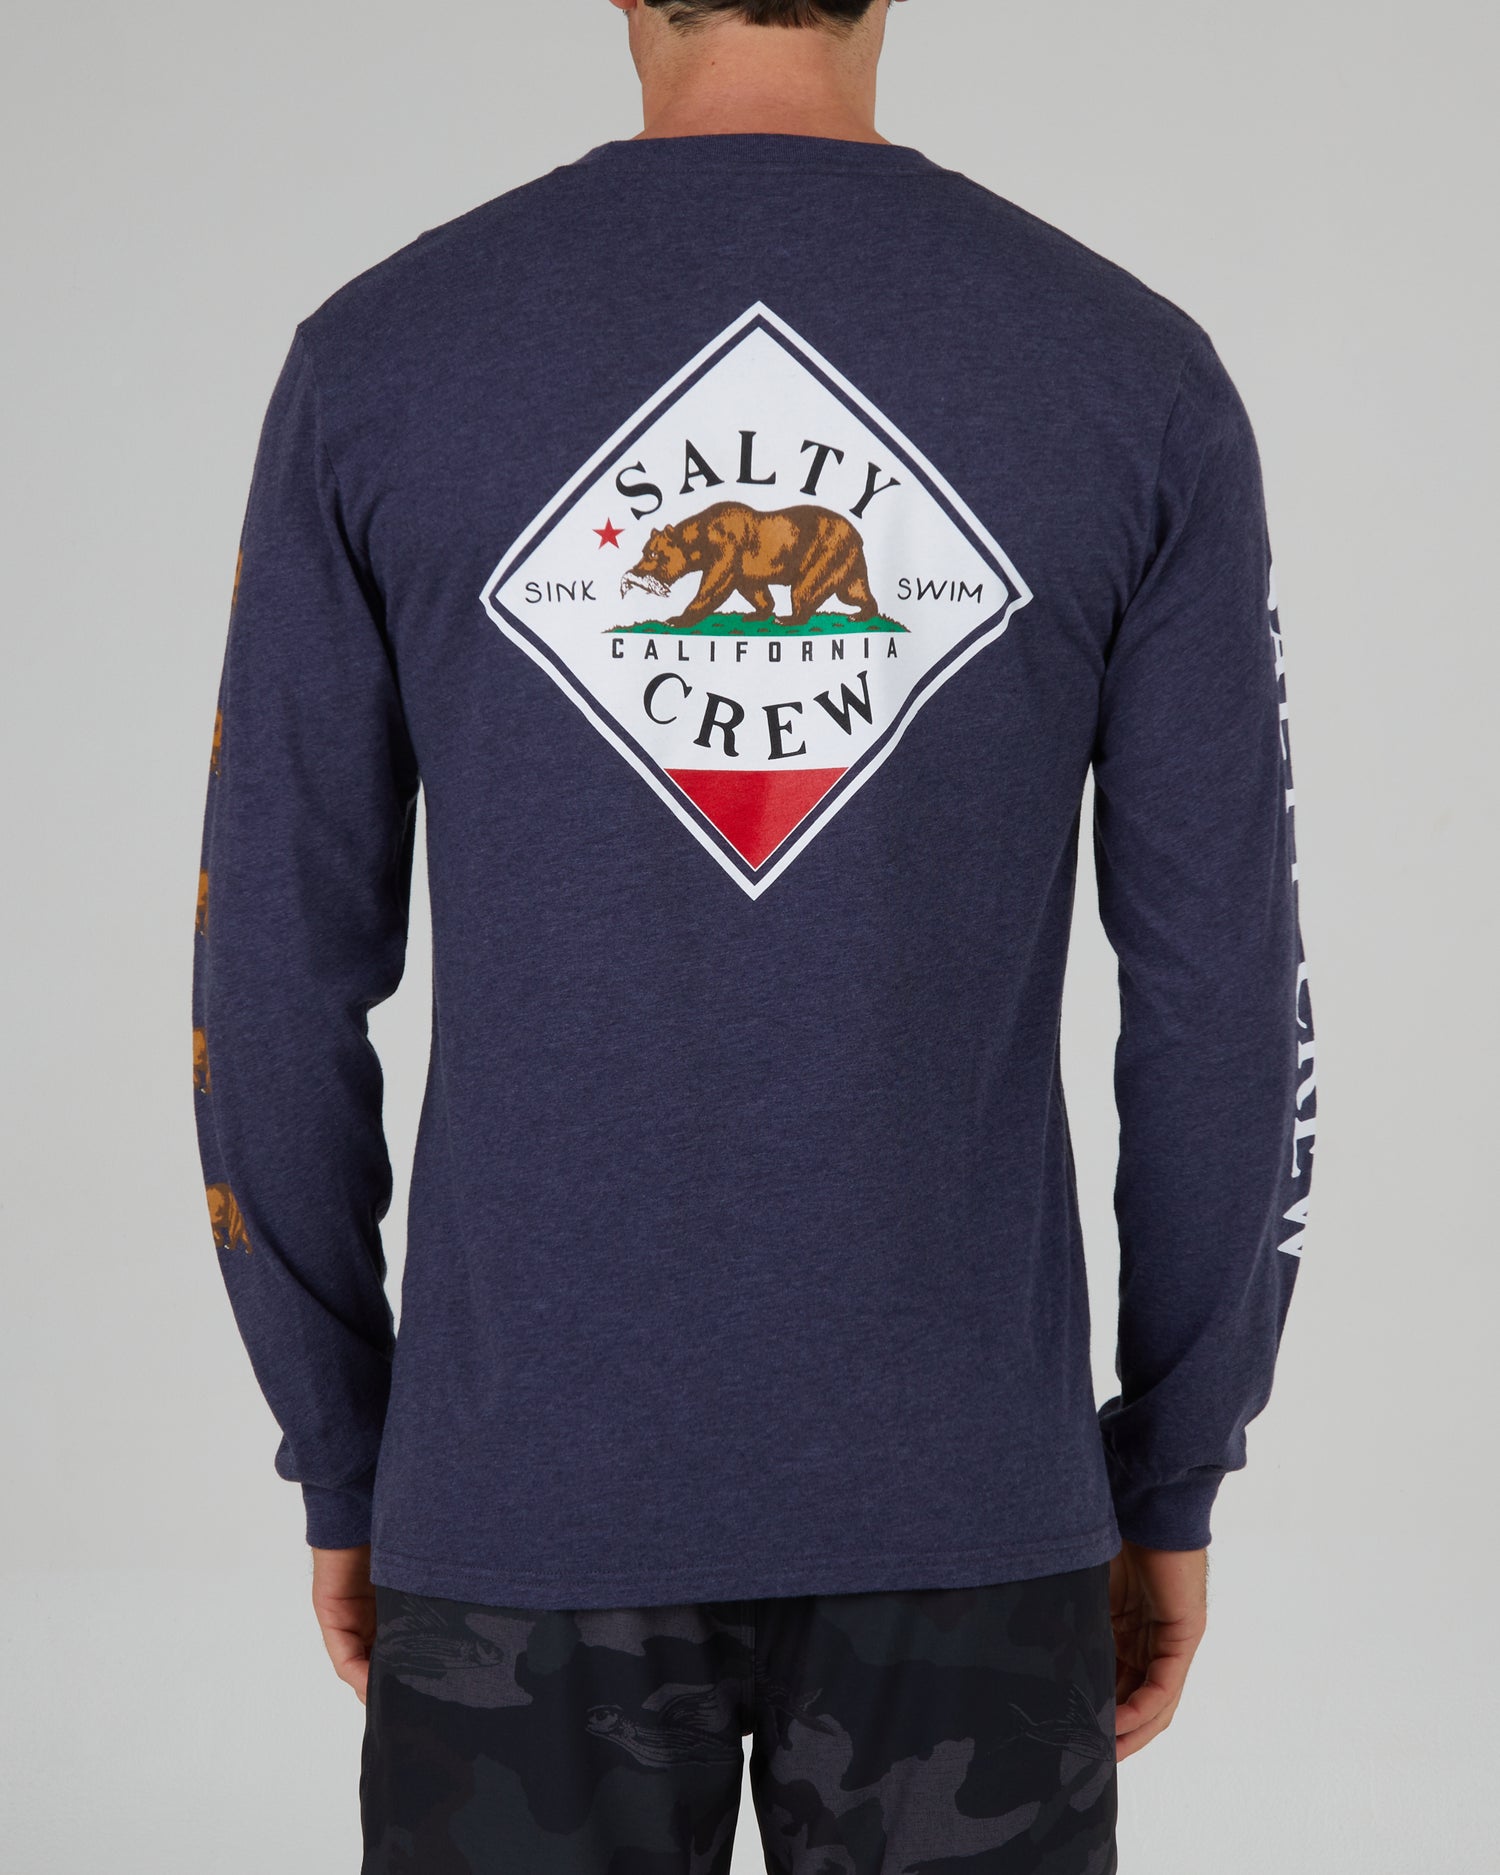 On body back of the Tippet Cali Navy Heather L/S Premium Tee